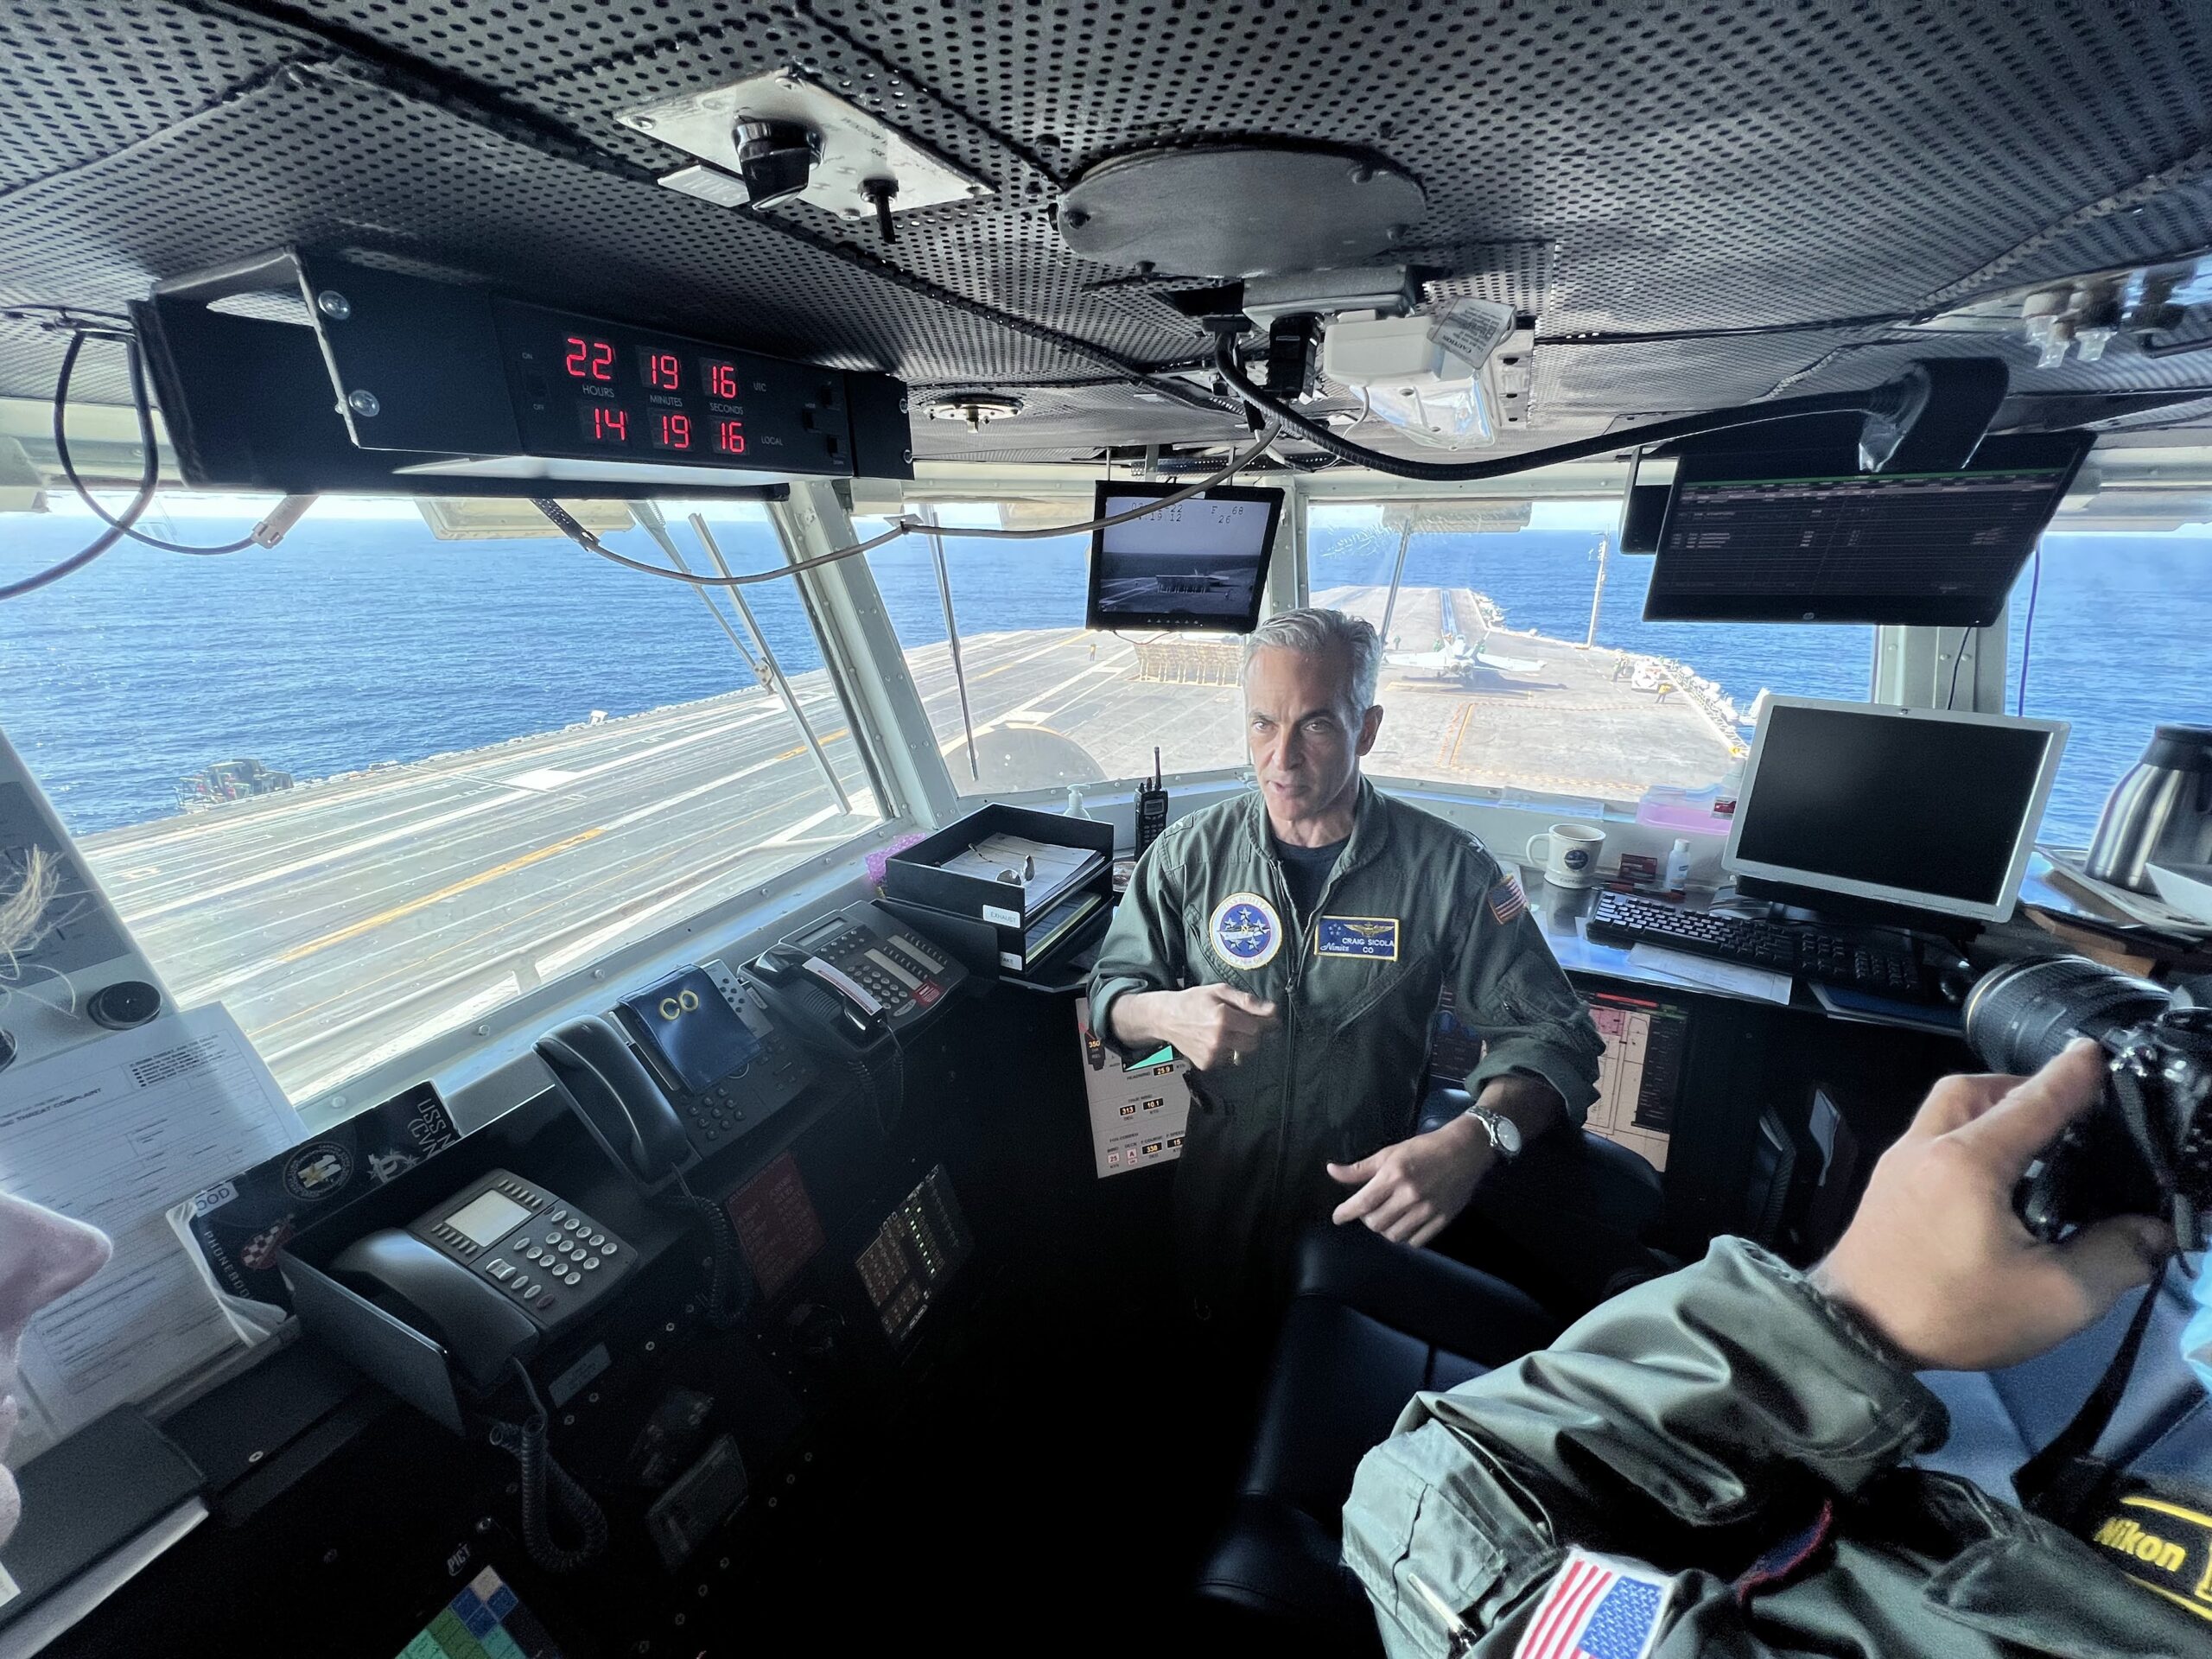 What it’s Like To Land on an Aircraft Carrier as a Civilian